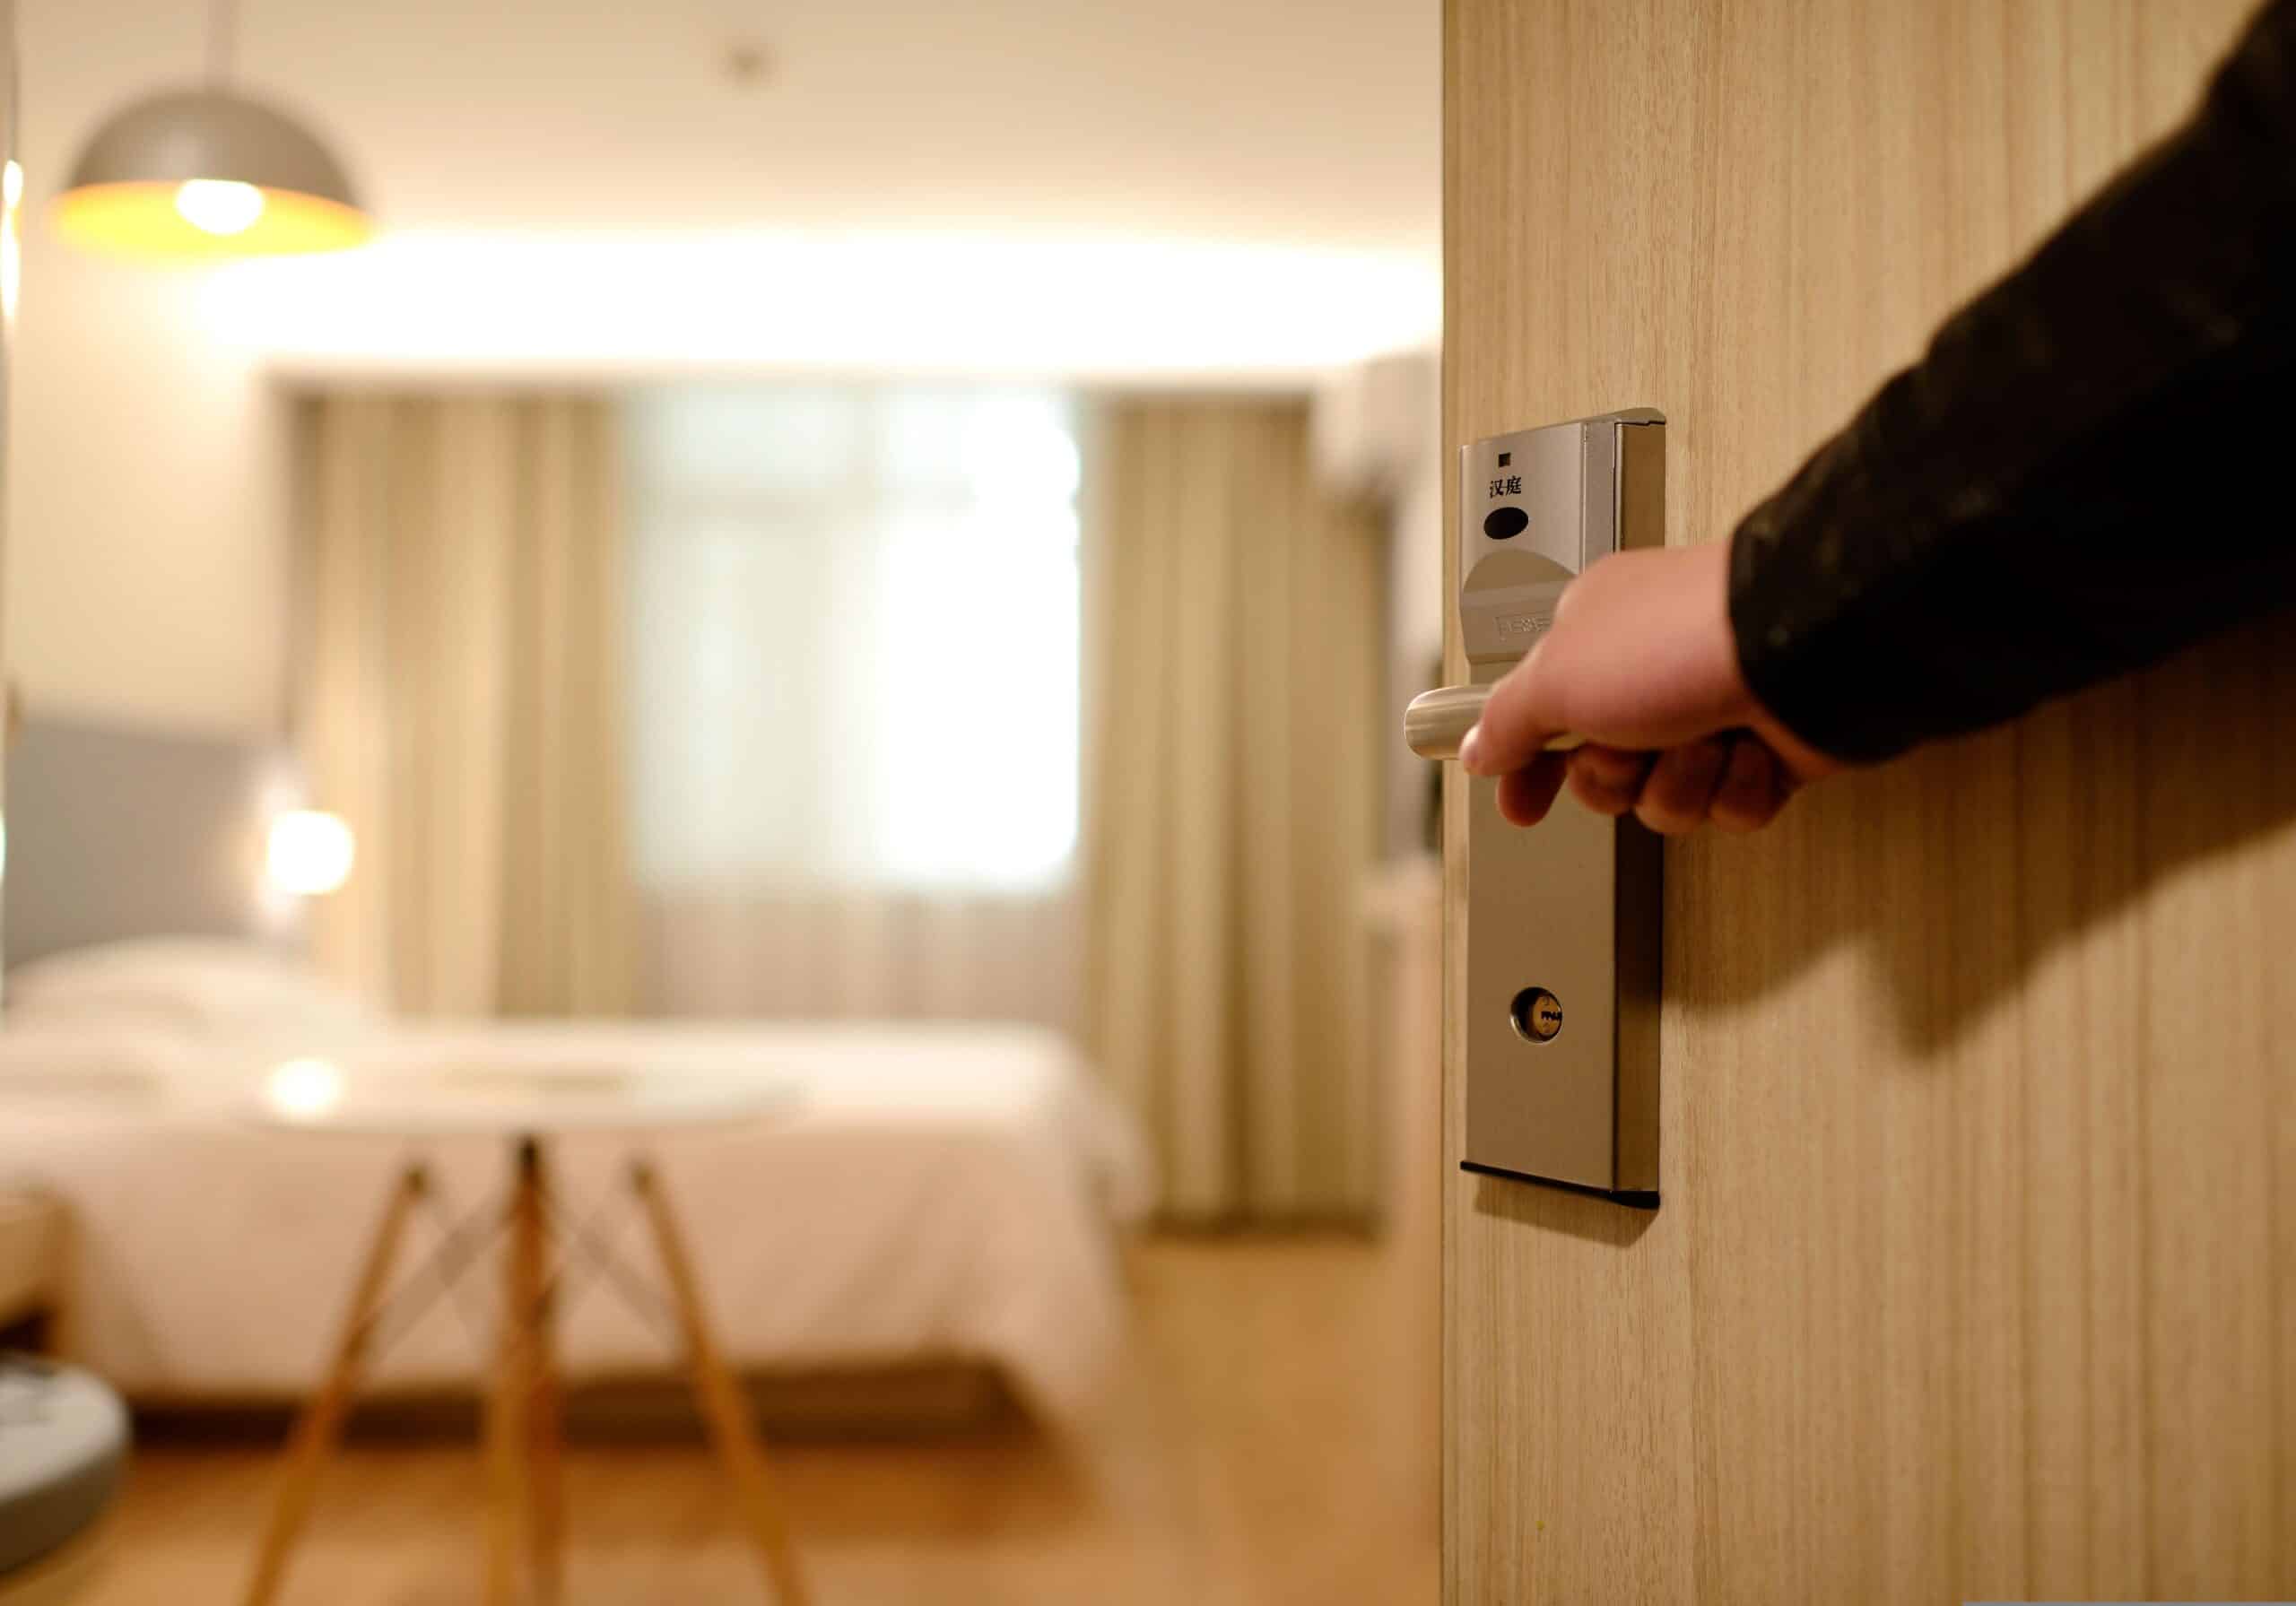 The Secrets of Hotel Lost and Found